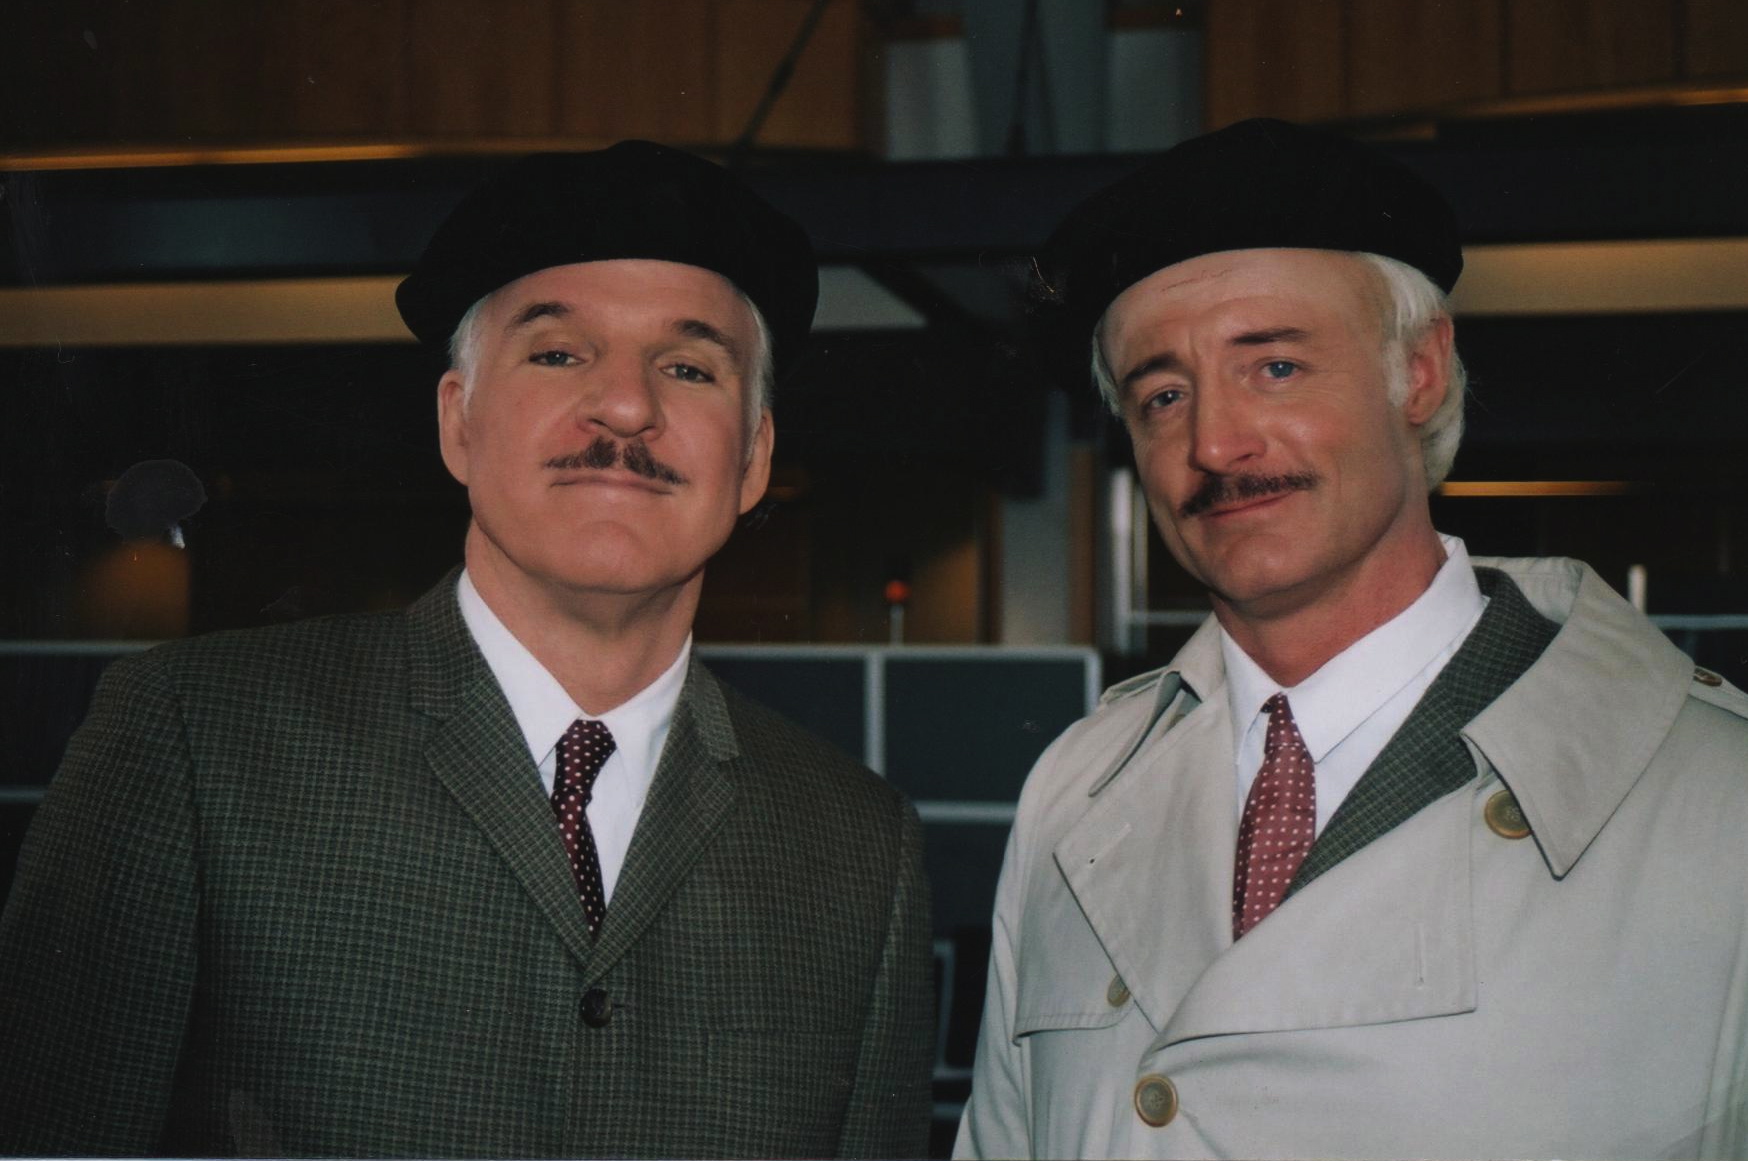 Steve Martin and Dan Shea in The Pink Panther (2006)